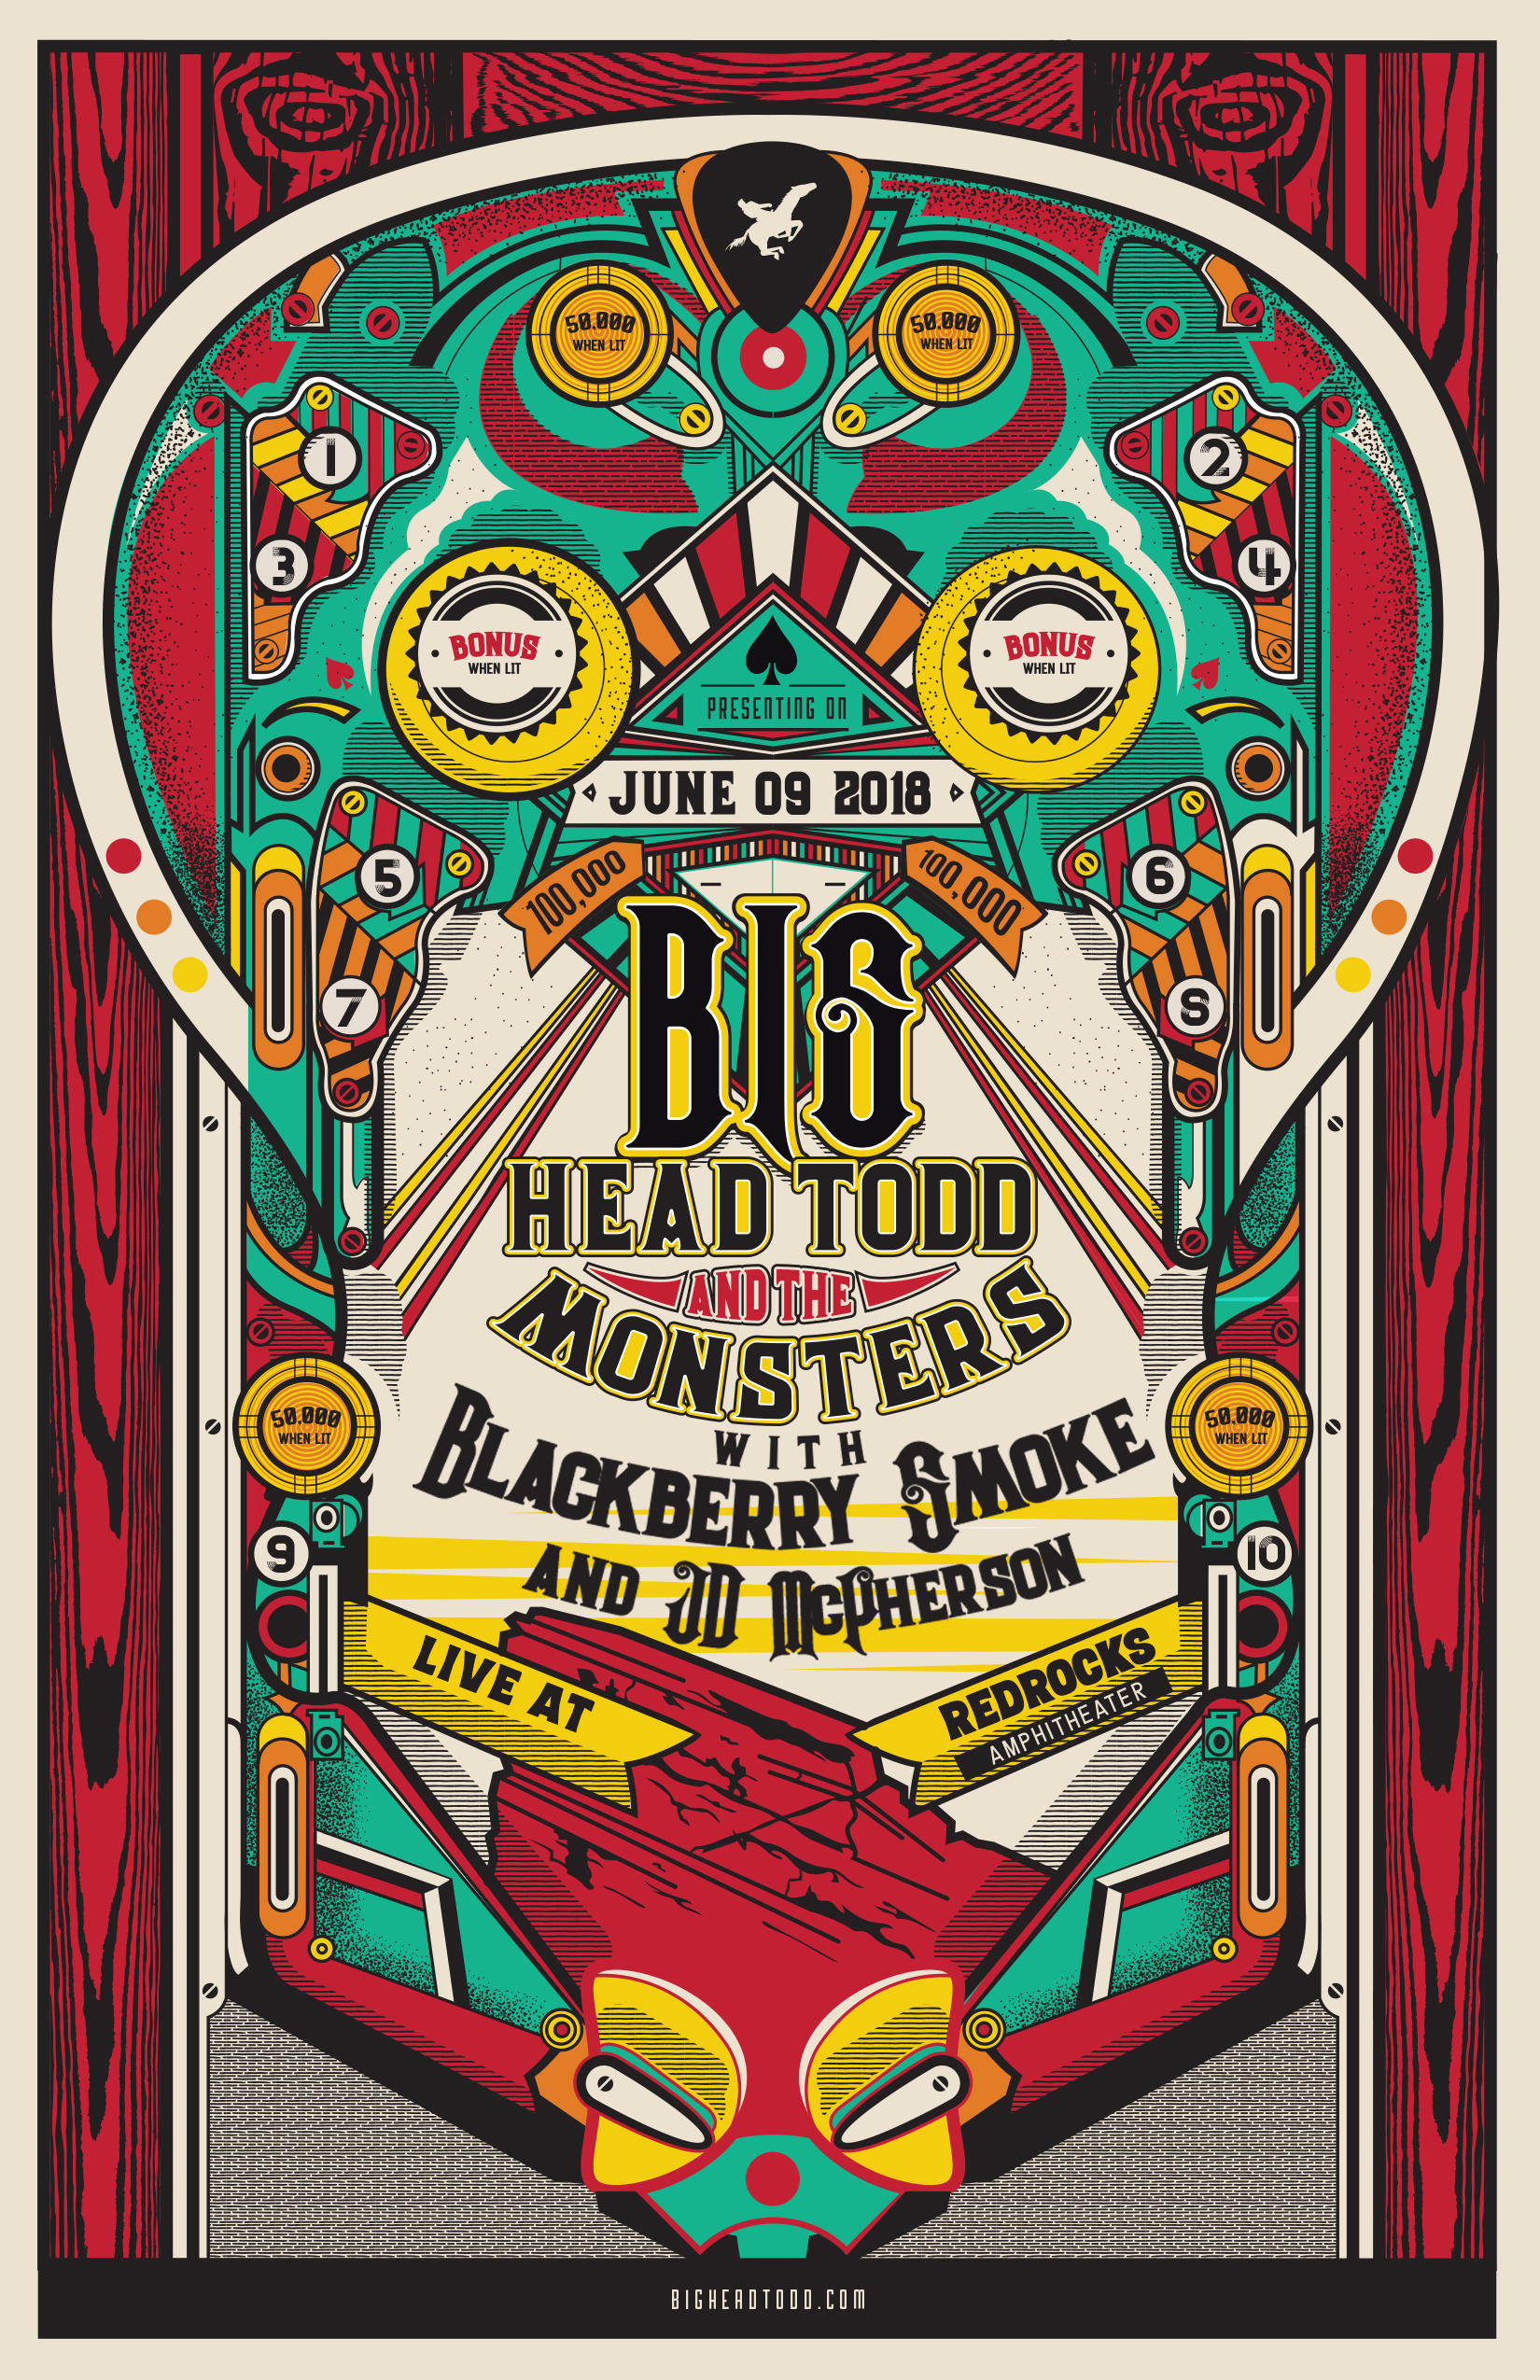 Blackberry Smoke & JD McPherson will be joining Big Head Todd at Red Rocks on June 9th! 